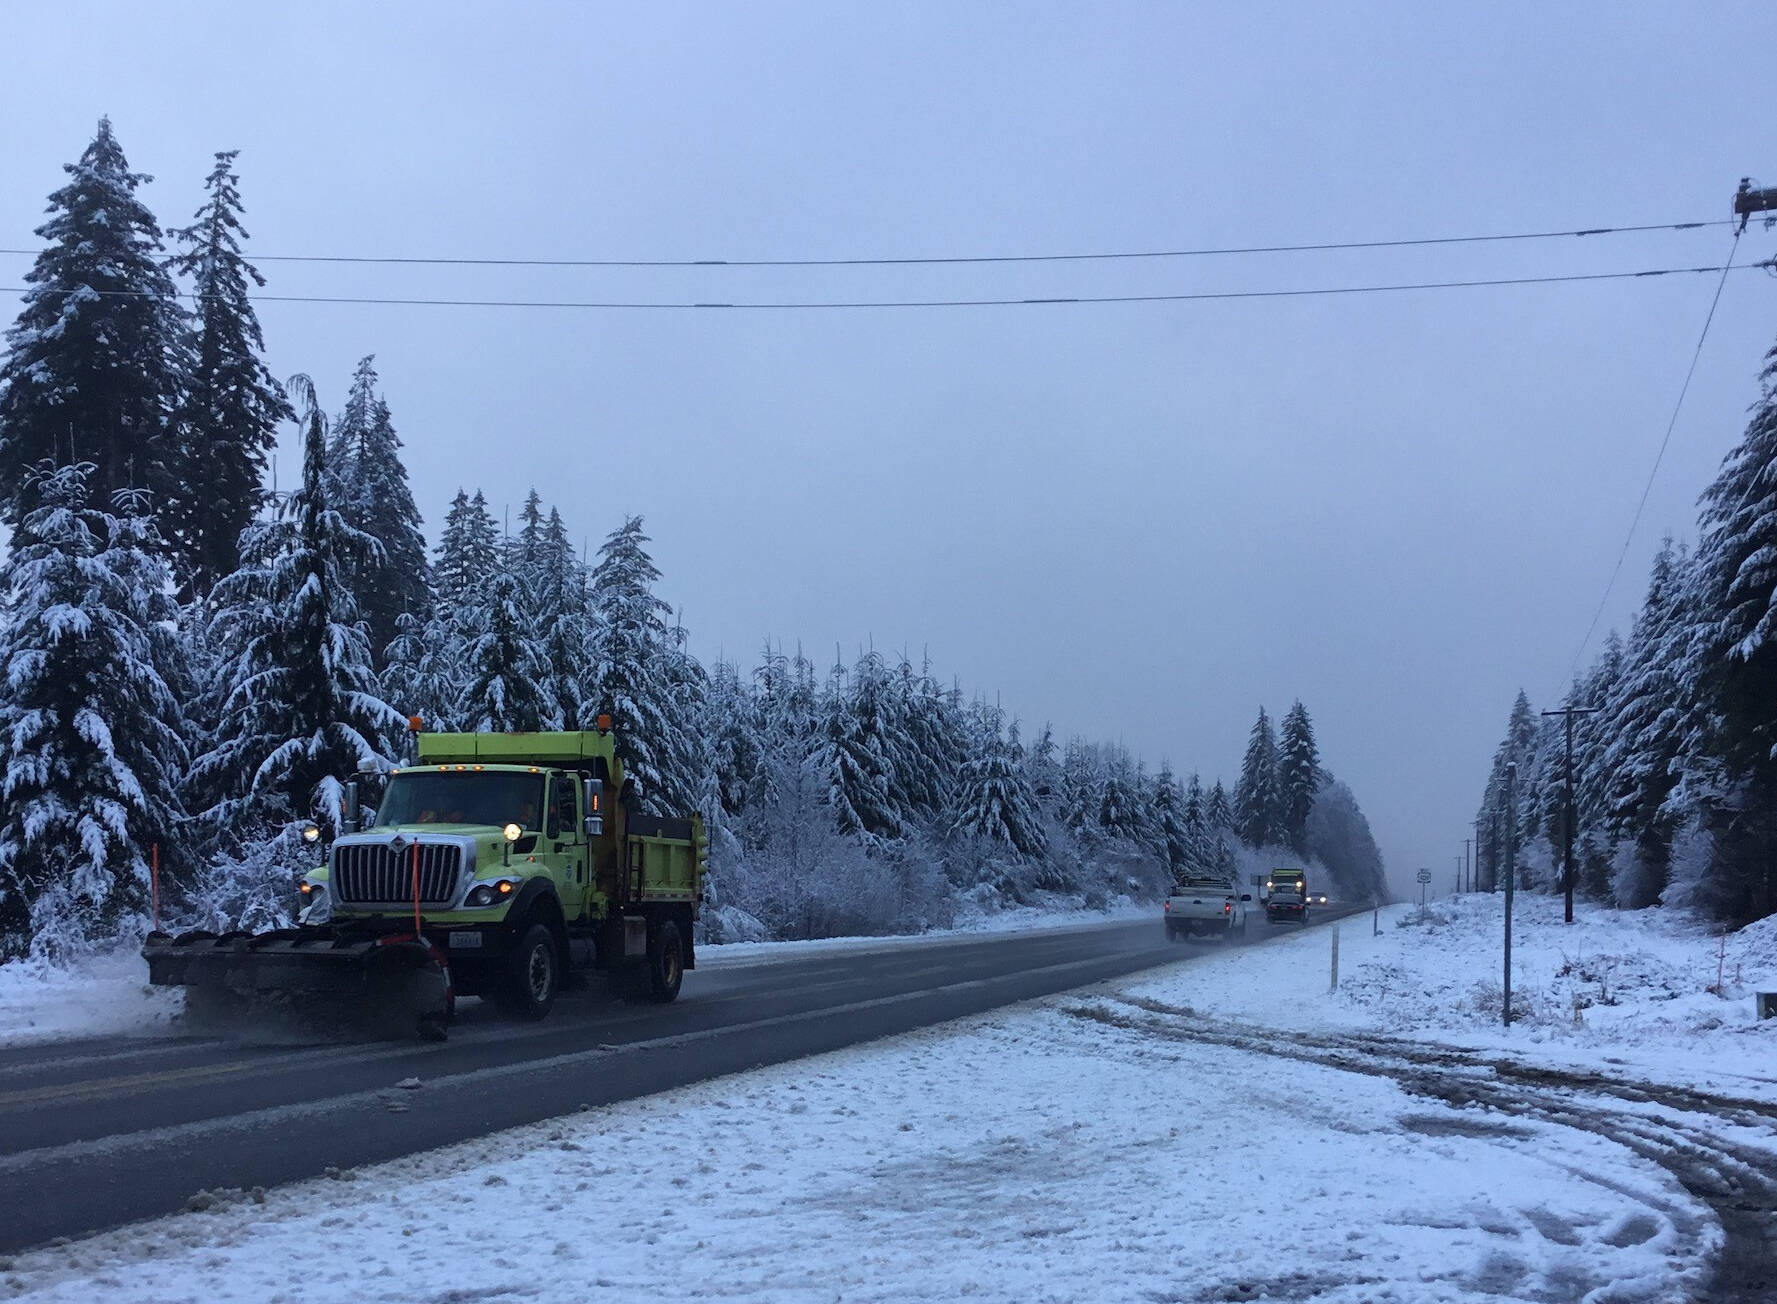 WSDOT crews have been kept busy near Fairholme with the start of winter weather. WSDOT photo